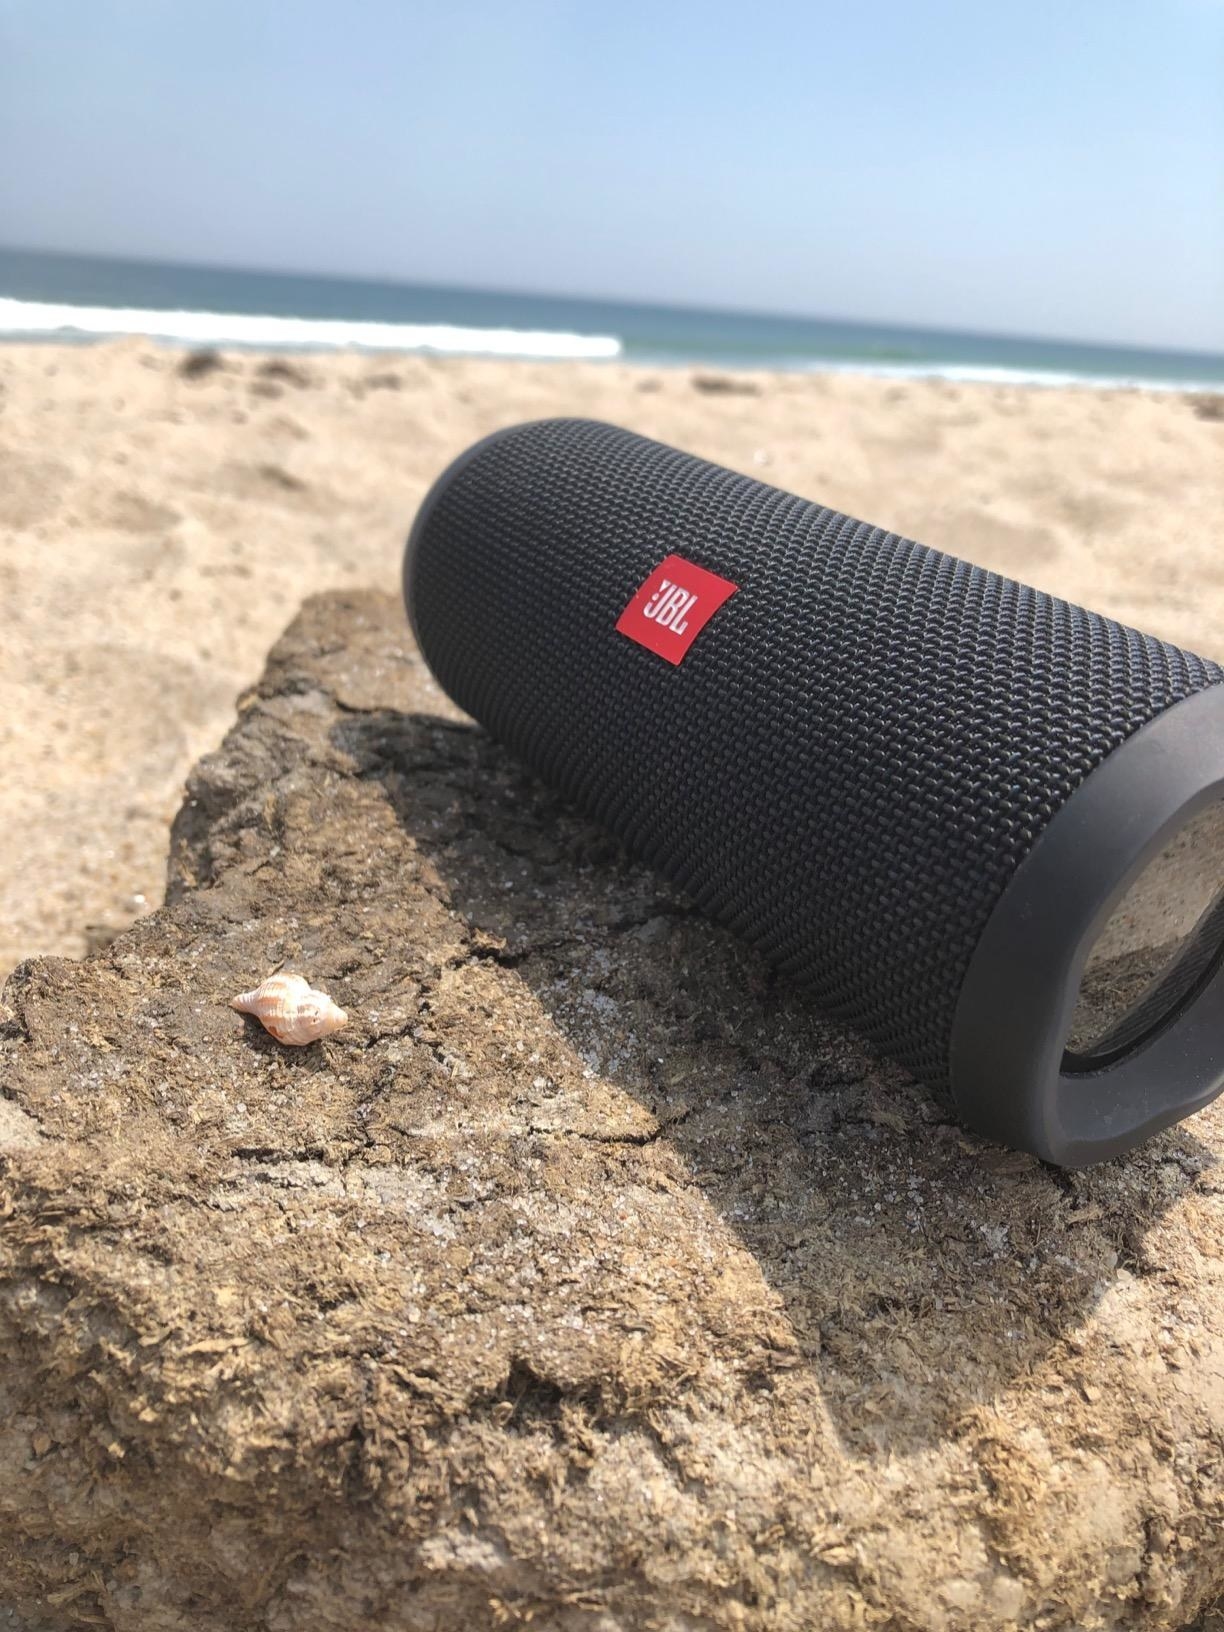 reviewer photo of a JBL black portable waterproof speaker at the beach